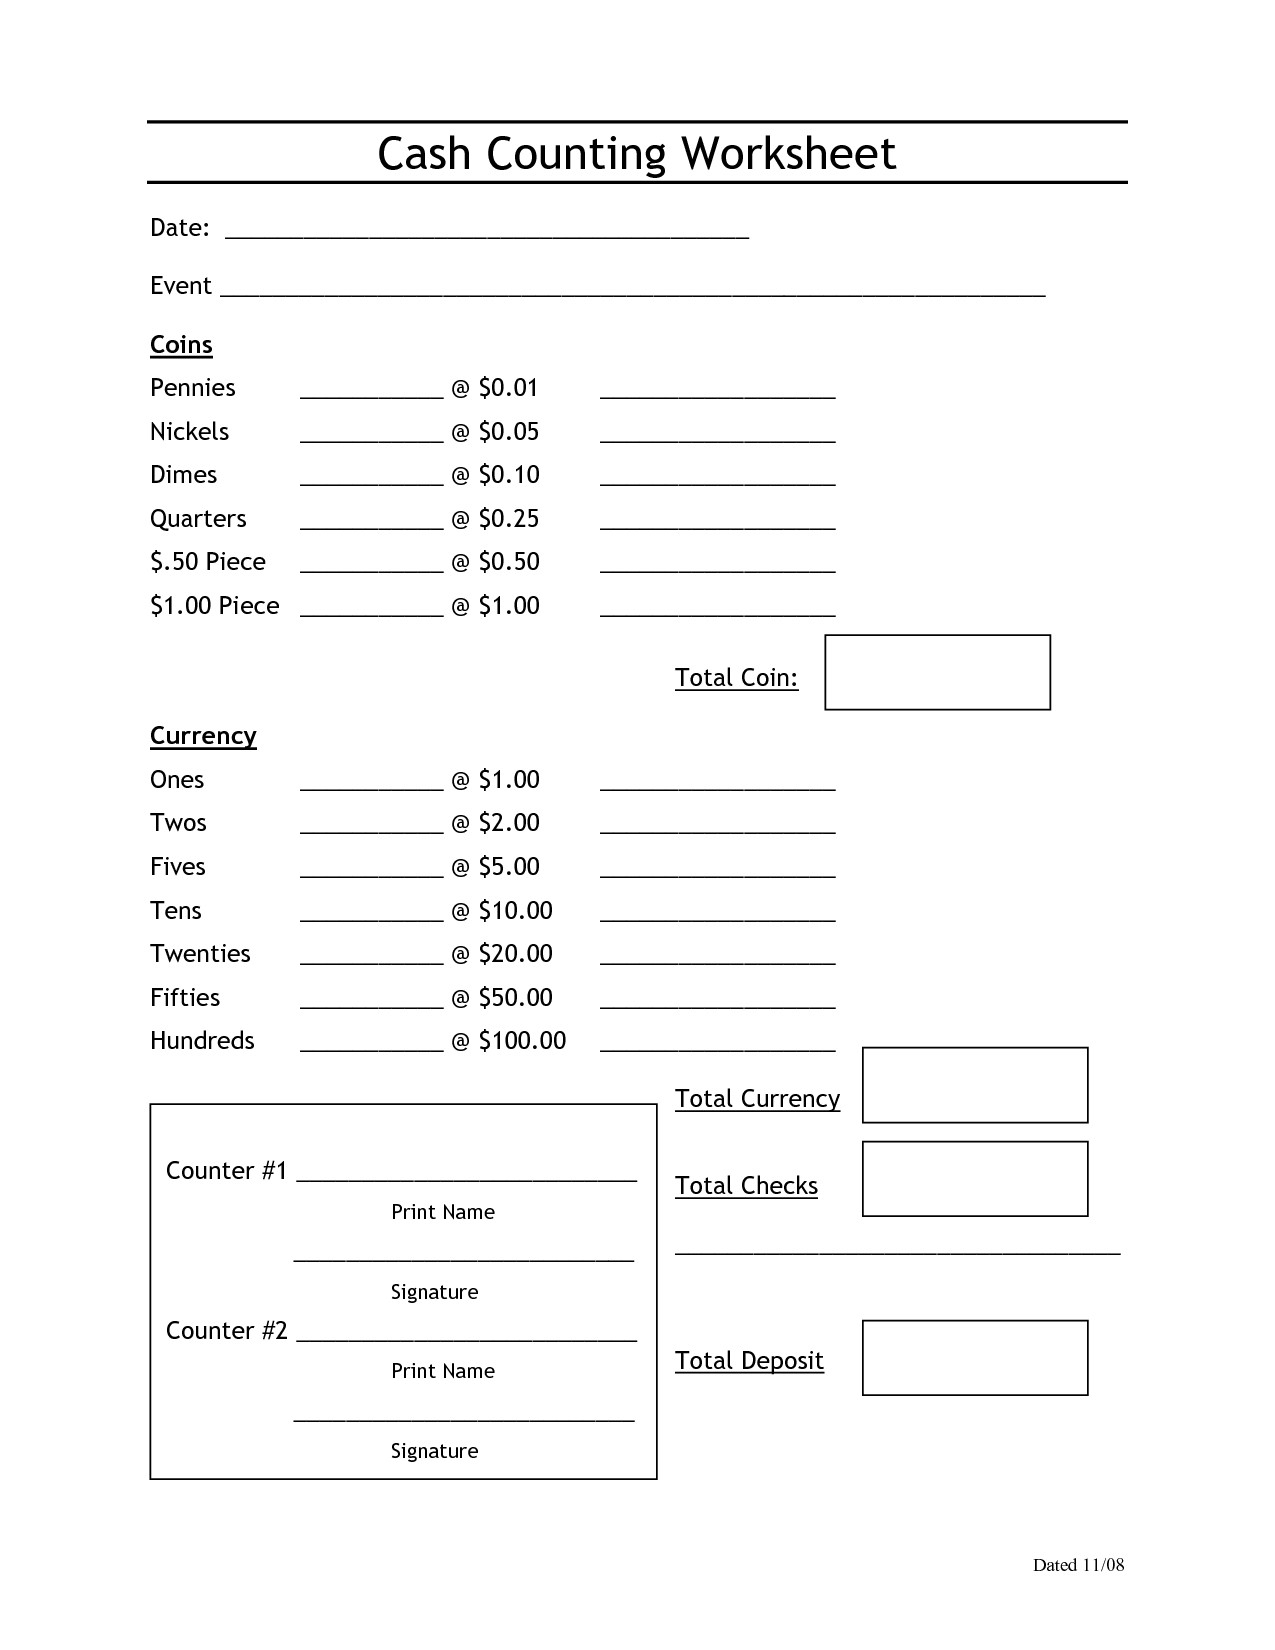 Free Math Worksheets Second Grade 2 Counting Money Counting Money Canadian Nickels Dimes Quarters